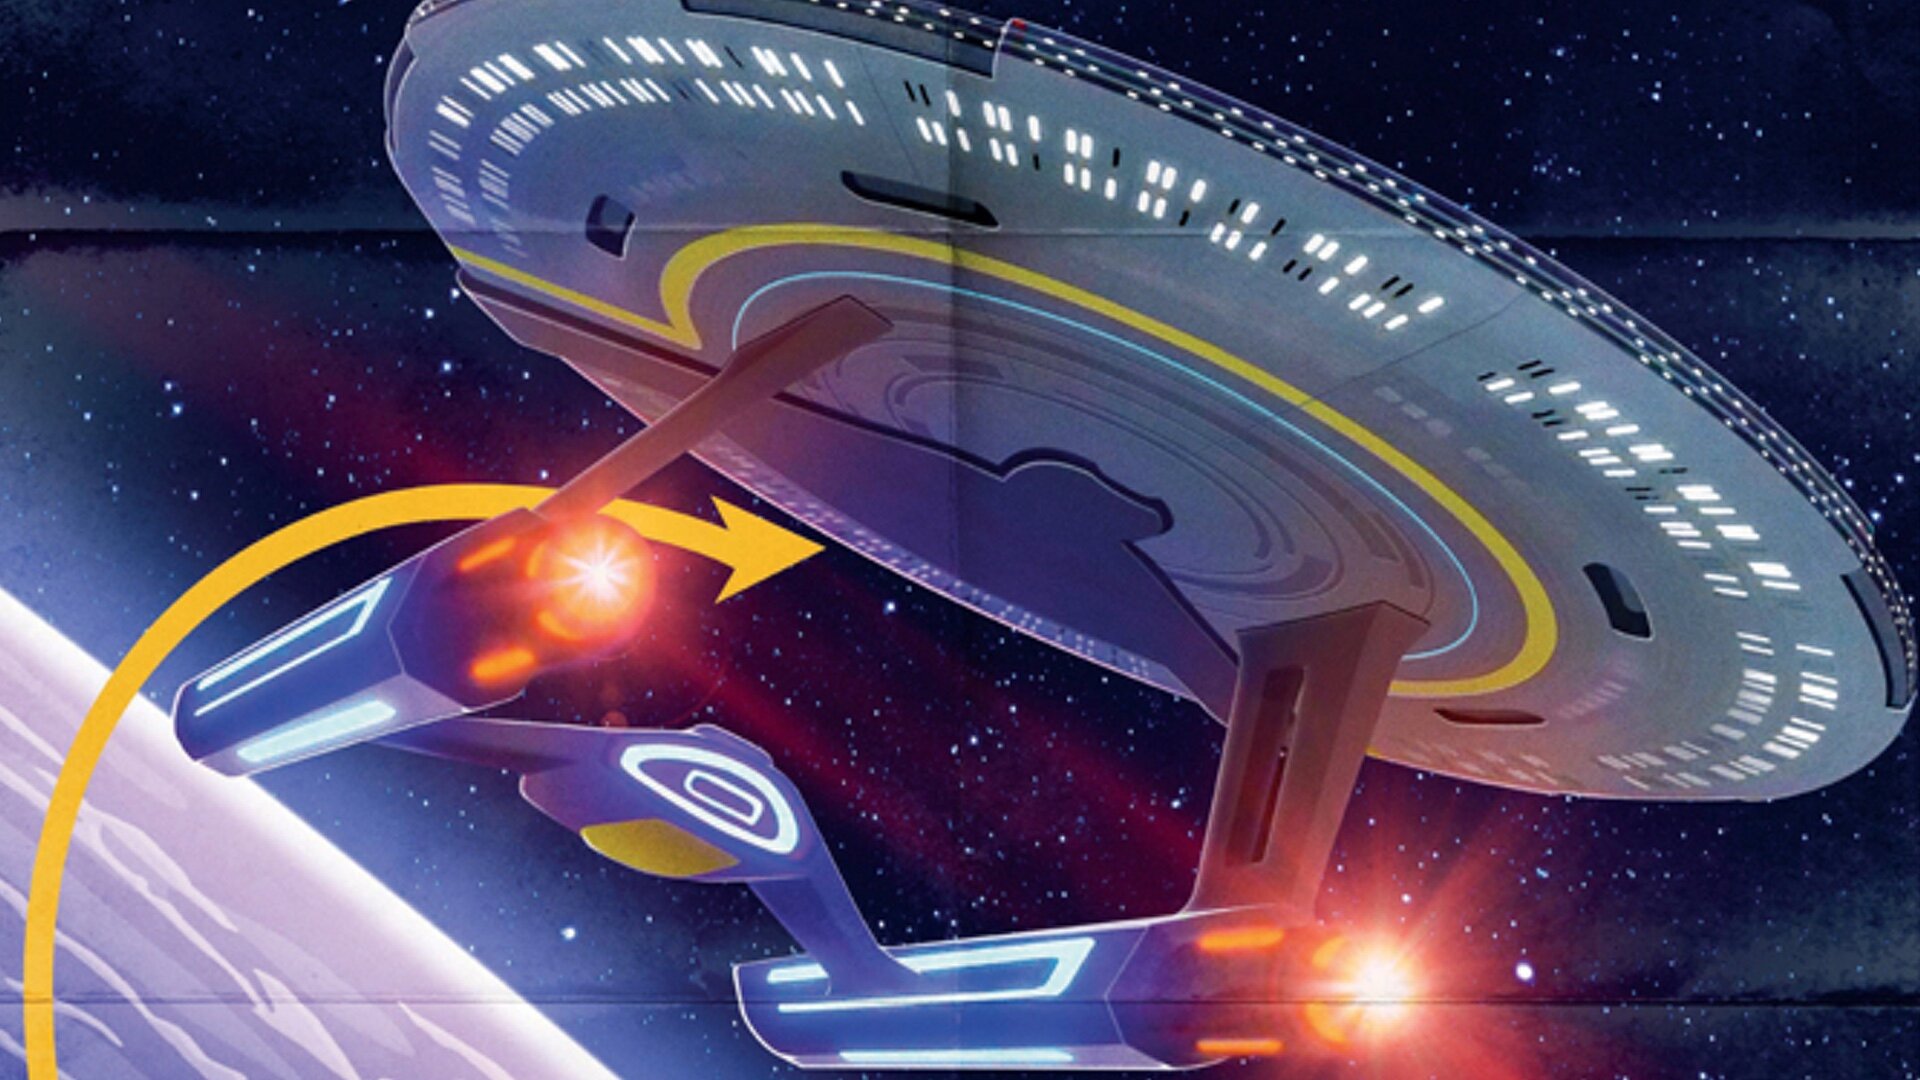 STAR TREK: LOWER DECKS Animated Series Gets a Premiere Date, Poster and New Image